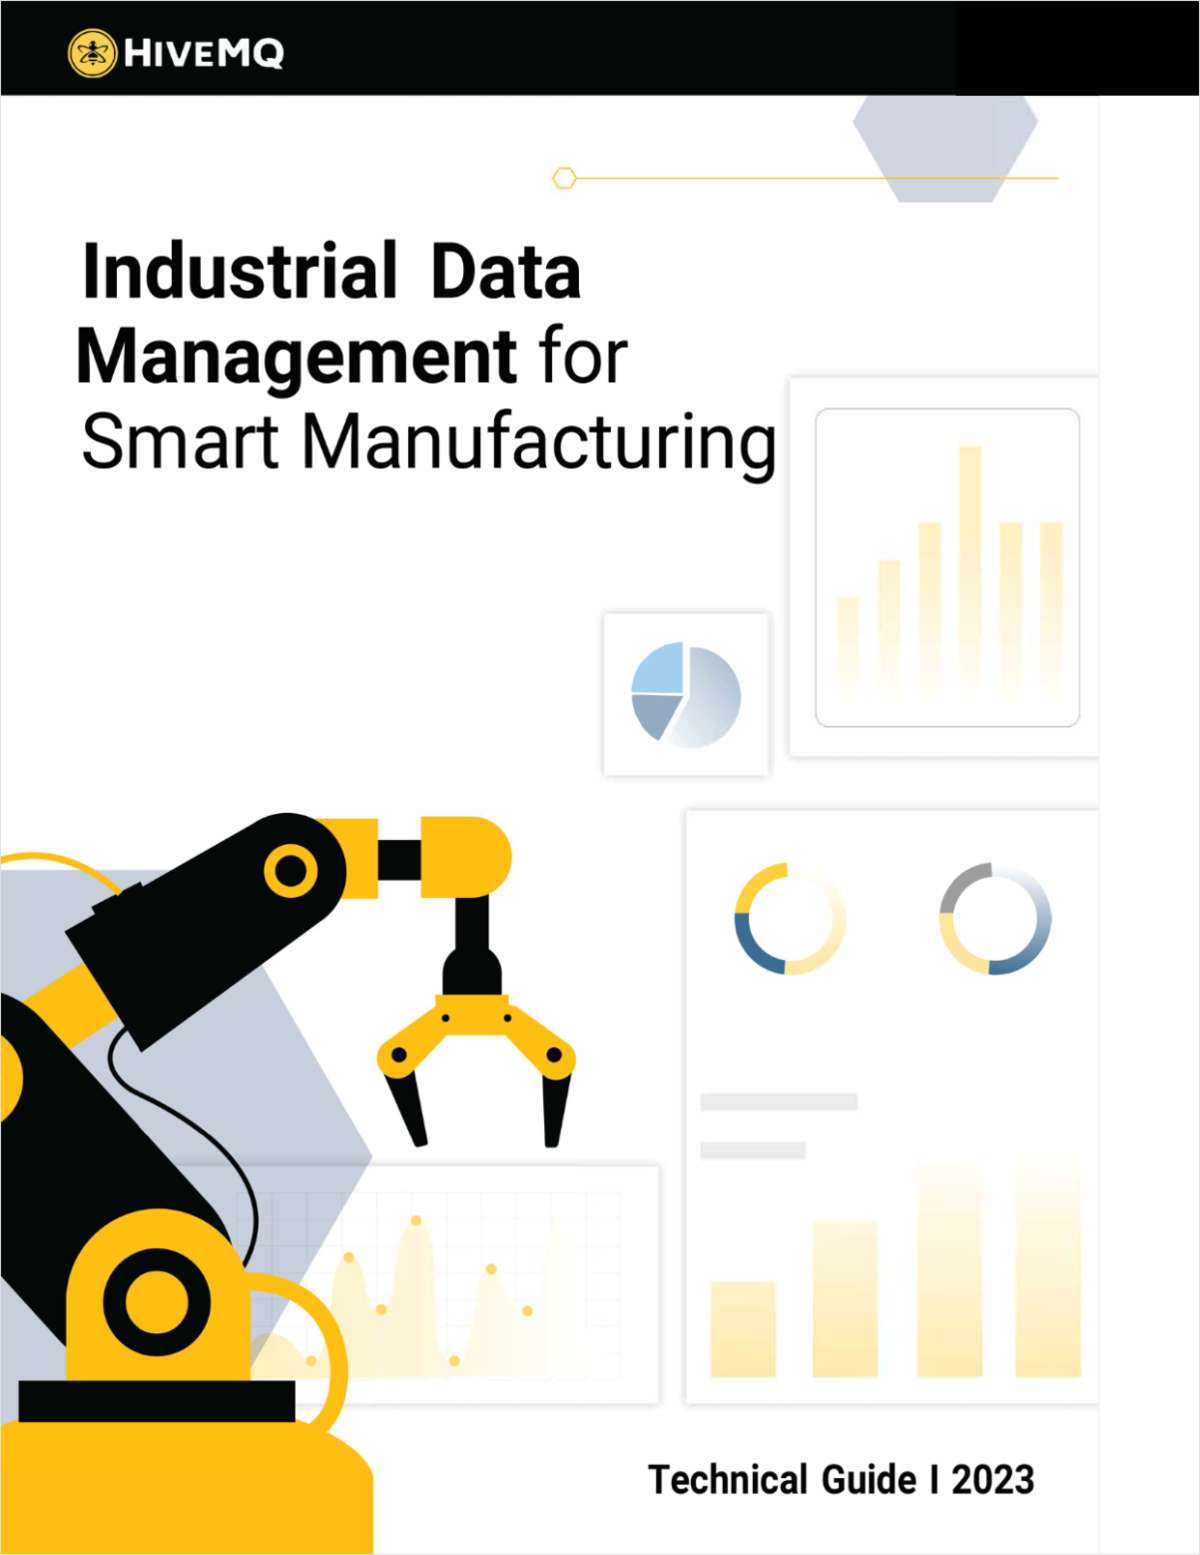 Industrial Data Management for Smart Manufacturing